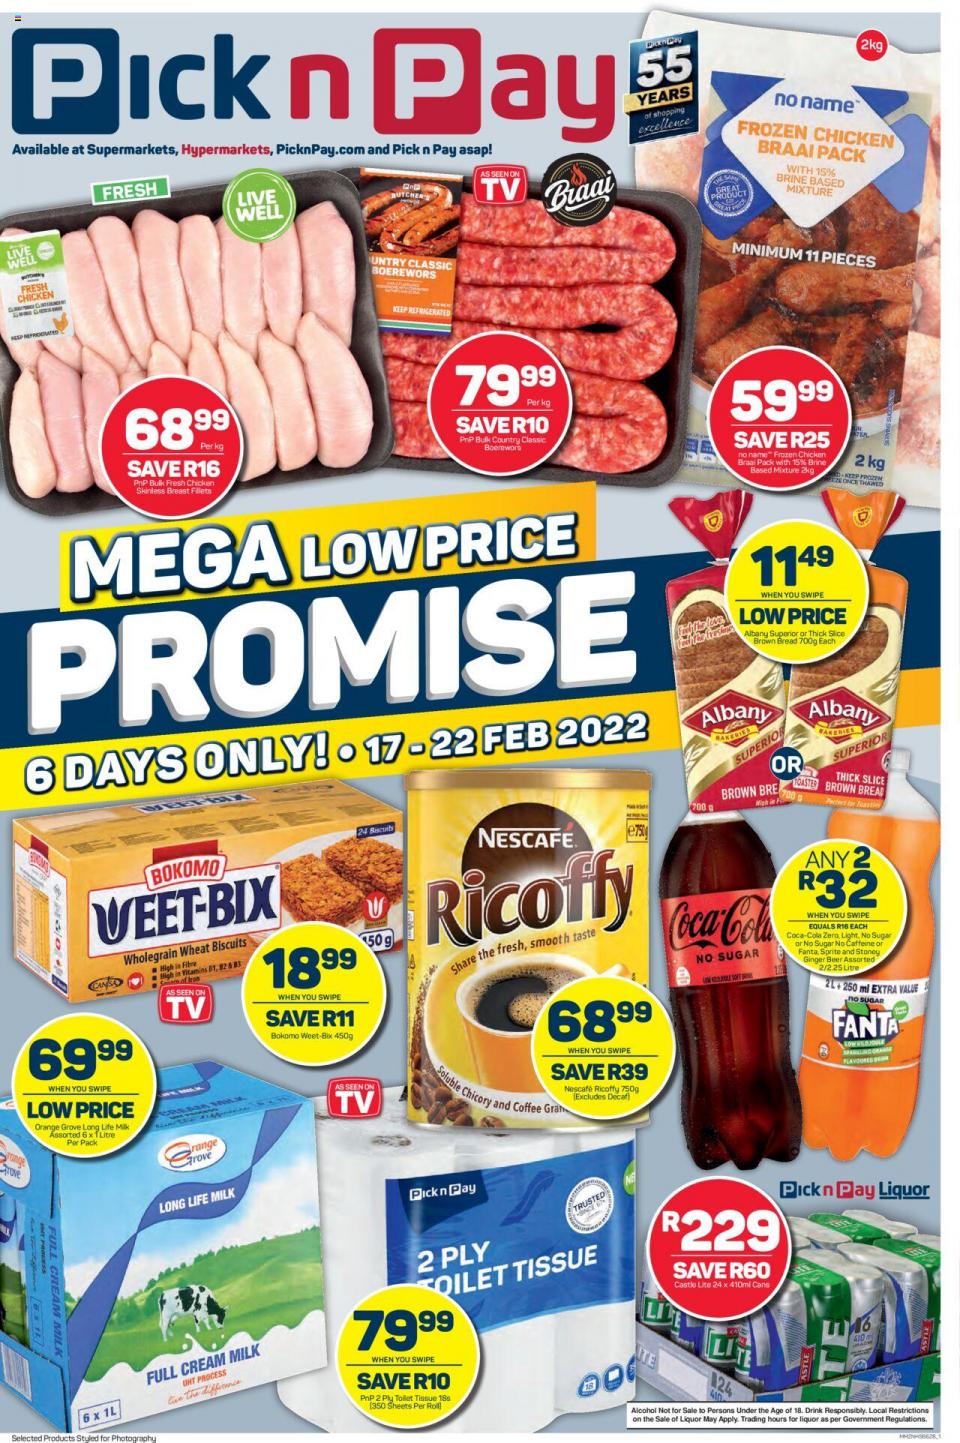 Pick n Pay Specials 17 – 22 February 2022